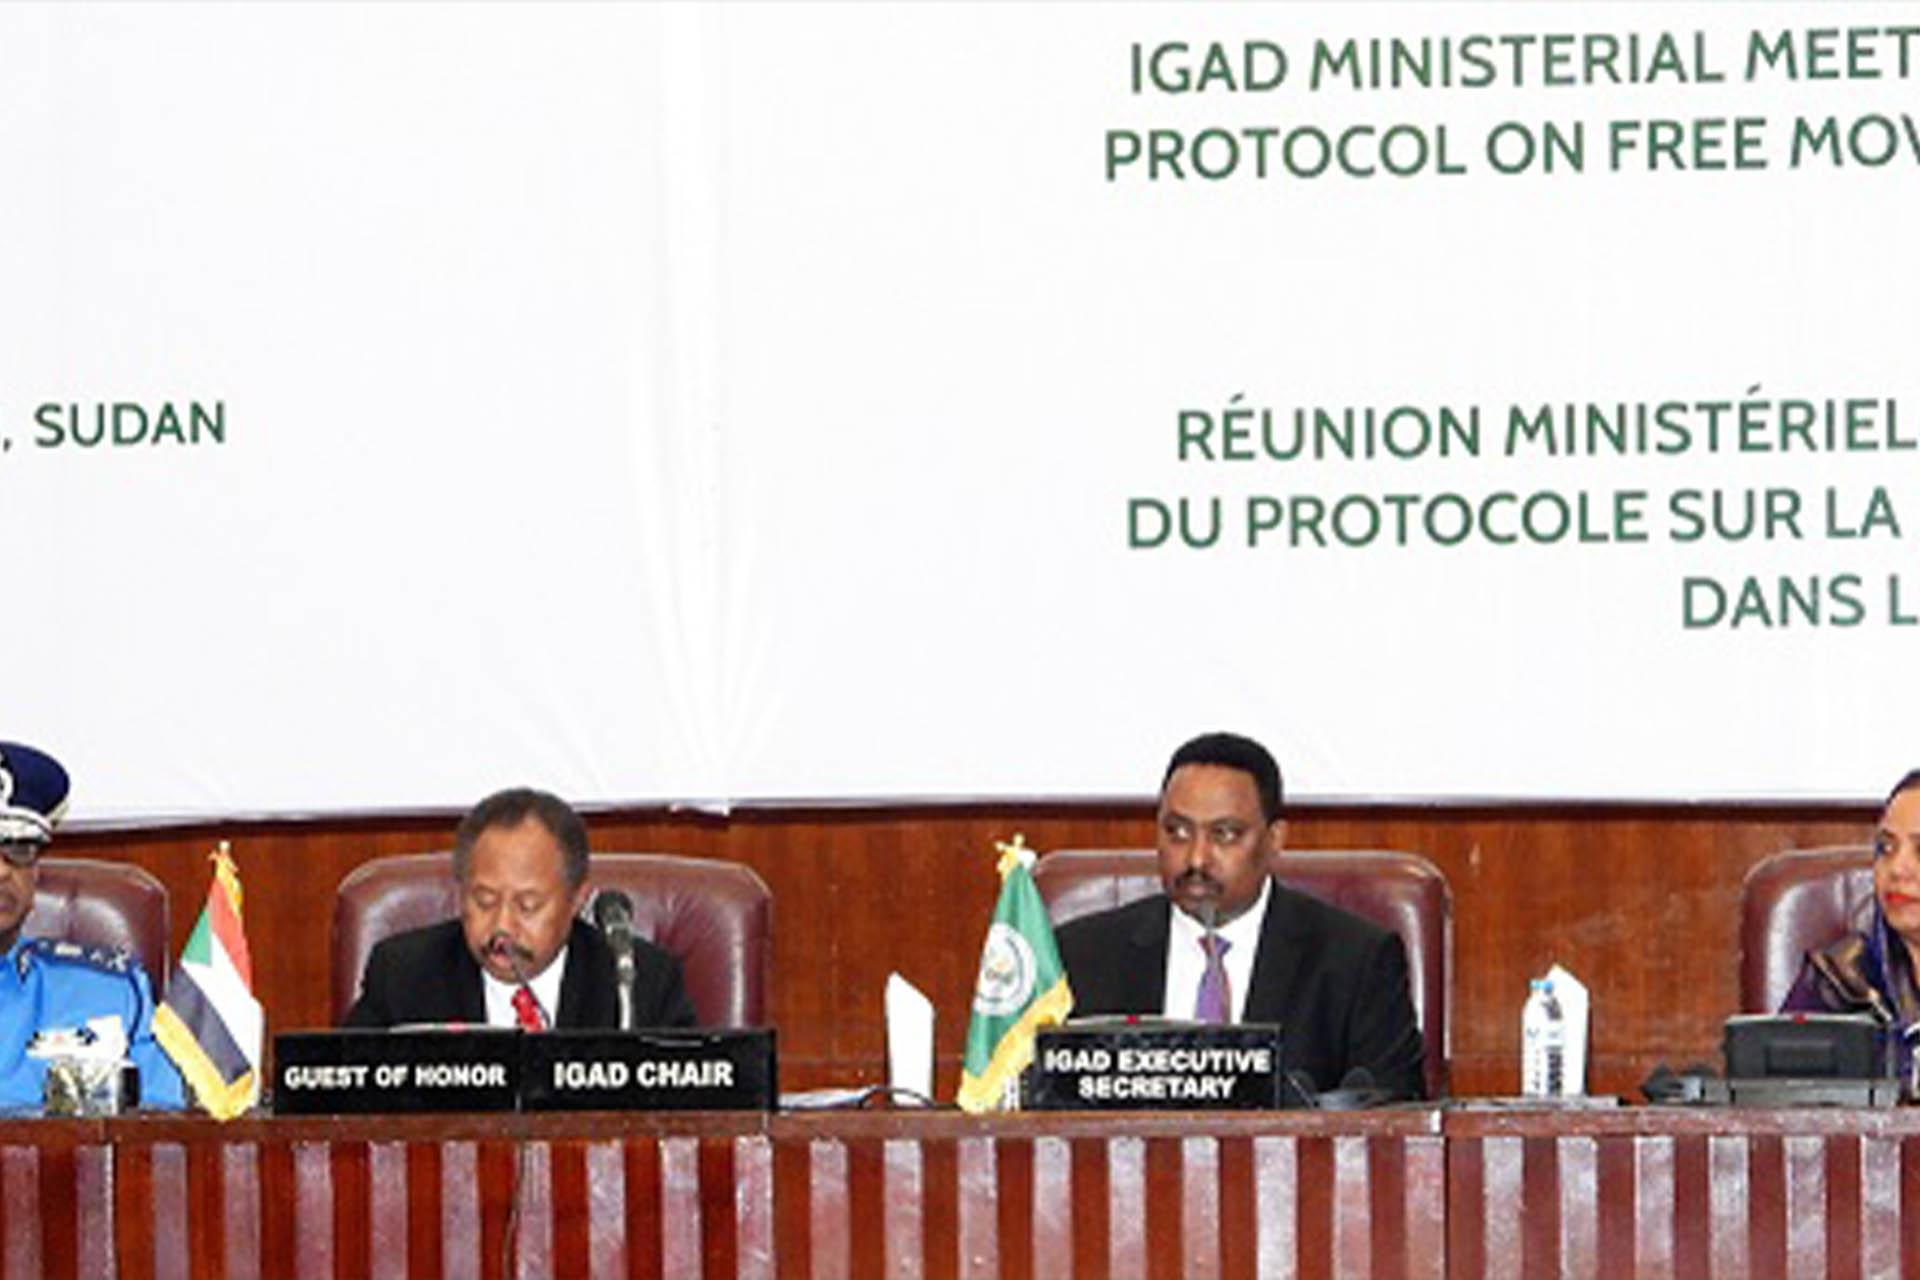 Protocol on Free Movement of Persons Endorsed at Ministerial Meeting